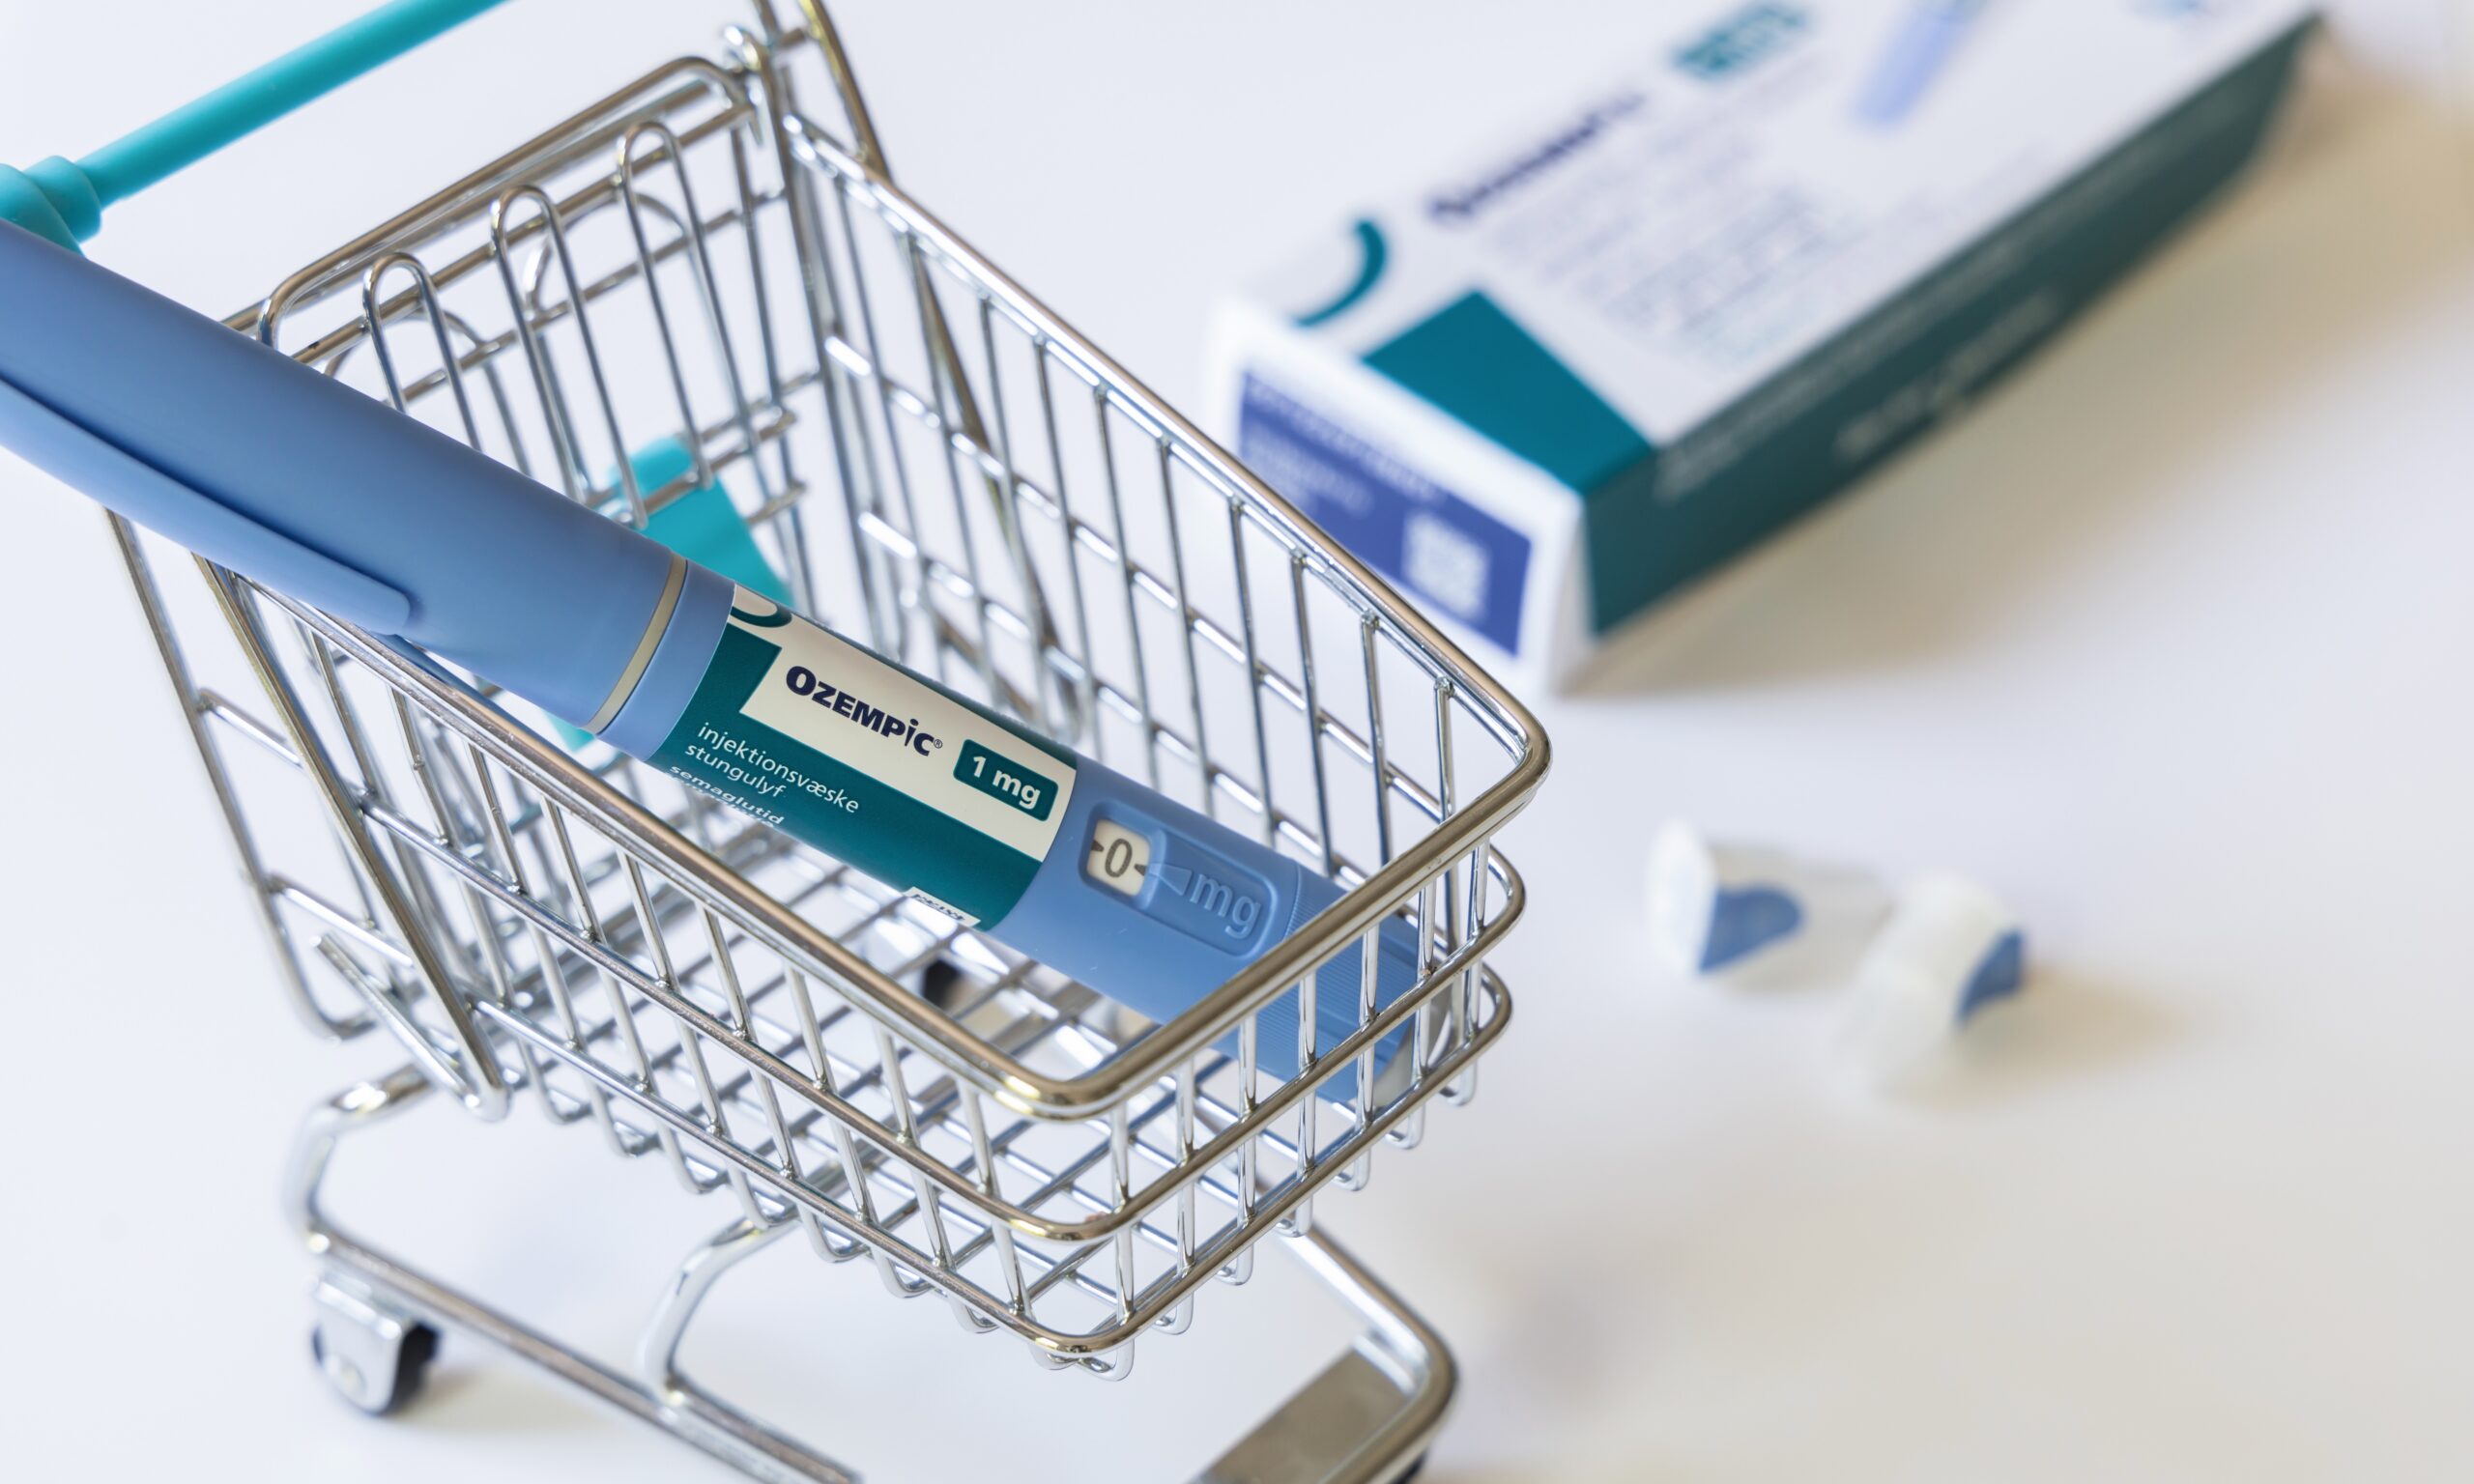 An Ozempic injectable pen is shown inside a small metal toy grocery cart. There's a drug box sitting out of focus behind the cart.